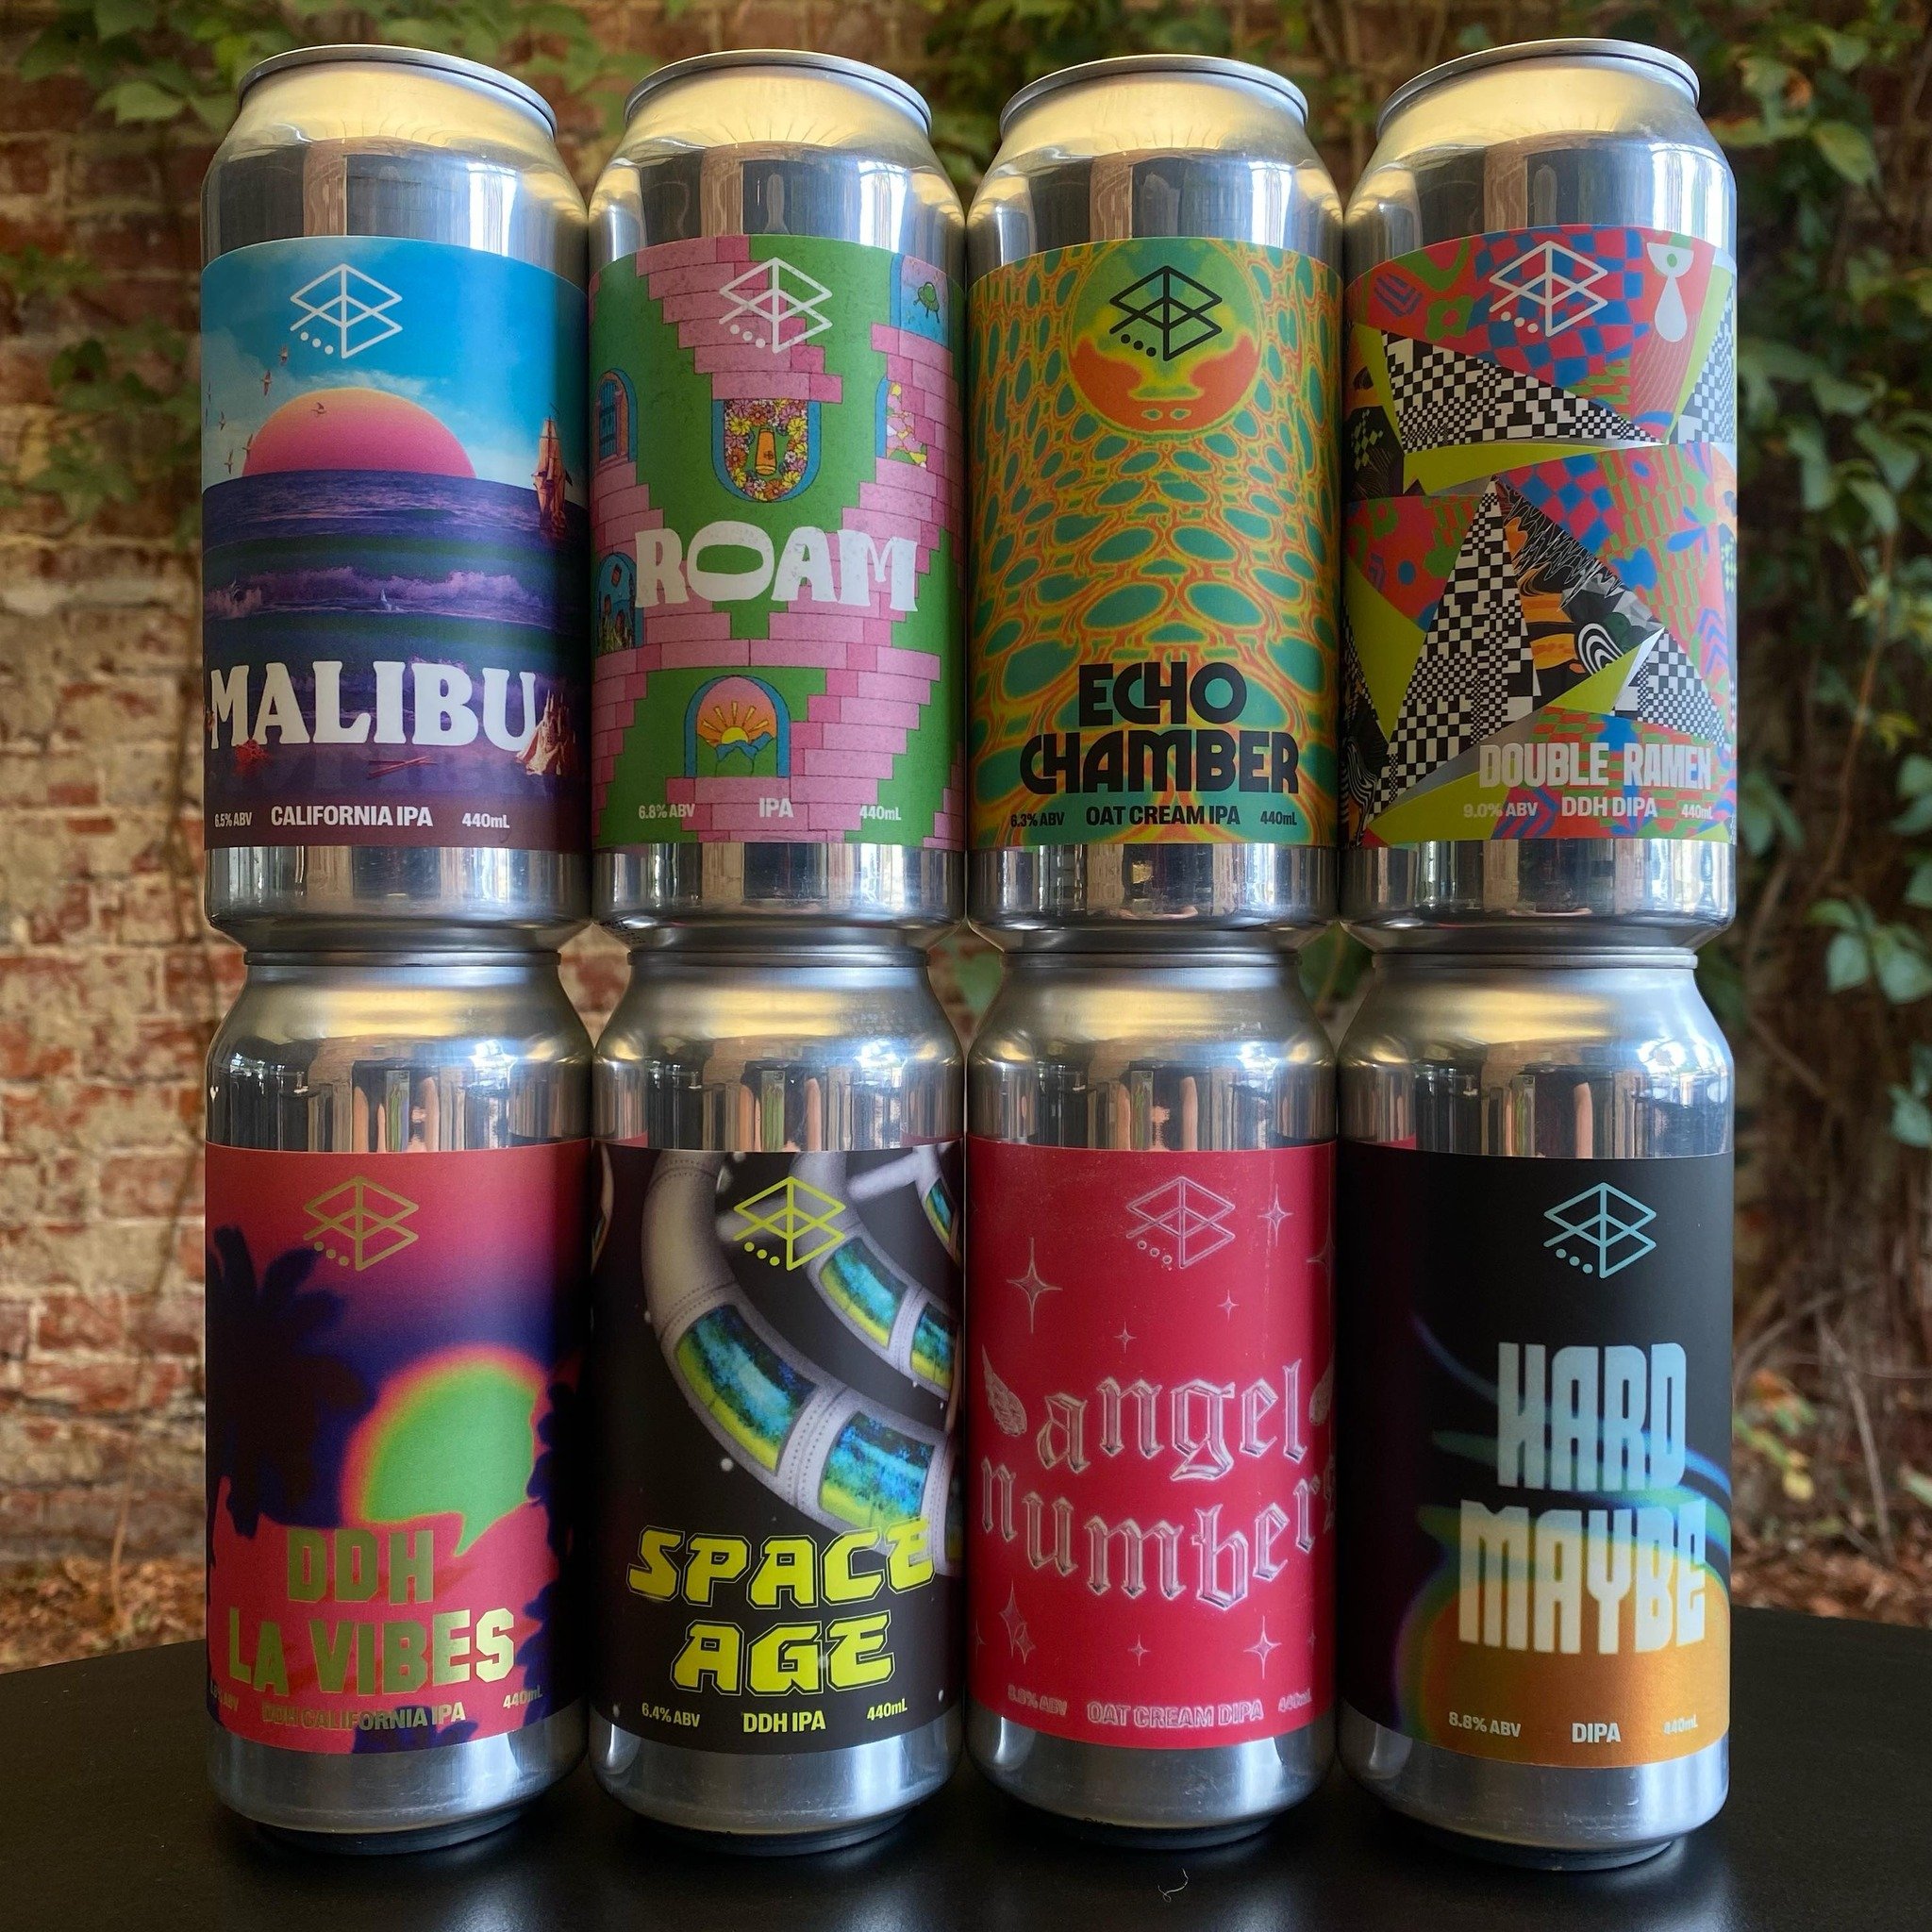 It&rsquo;s always a happy day when the Range truck pulls up!
8 new beers here from our mates in Queensland :

🏖️ Malibu
California IPA with Citra CRYO, Citra, Simcoe and Mosaic

🪟 Roam
IPA with Sabro LUPOMAX, Citra, Motueka and Centennial 

🔊  Ech